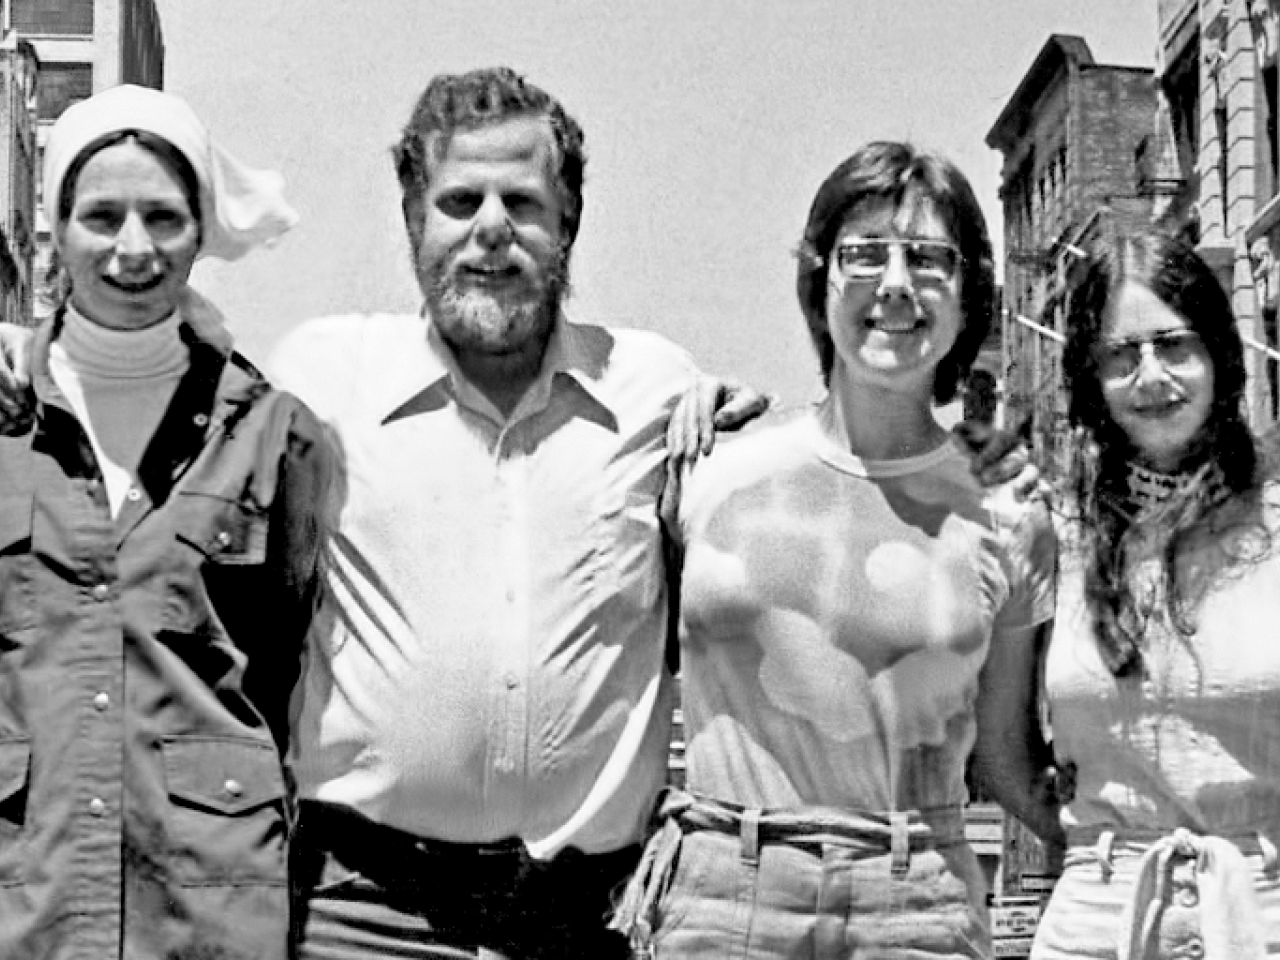 In this black and white shot from the 1970s, New Day Co-founders link arms and smile at the camera. From left to right:  Liane Brandon, Jim Klein, Julia Reichert, and Amalie R. Rothschild.